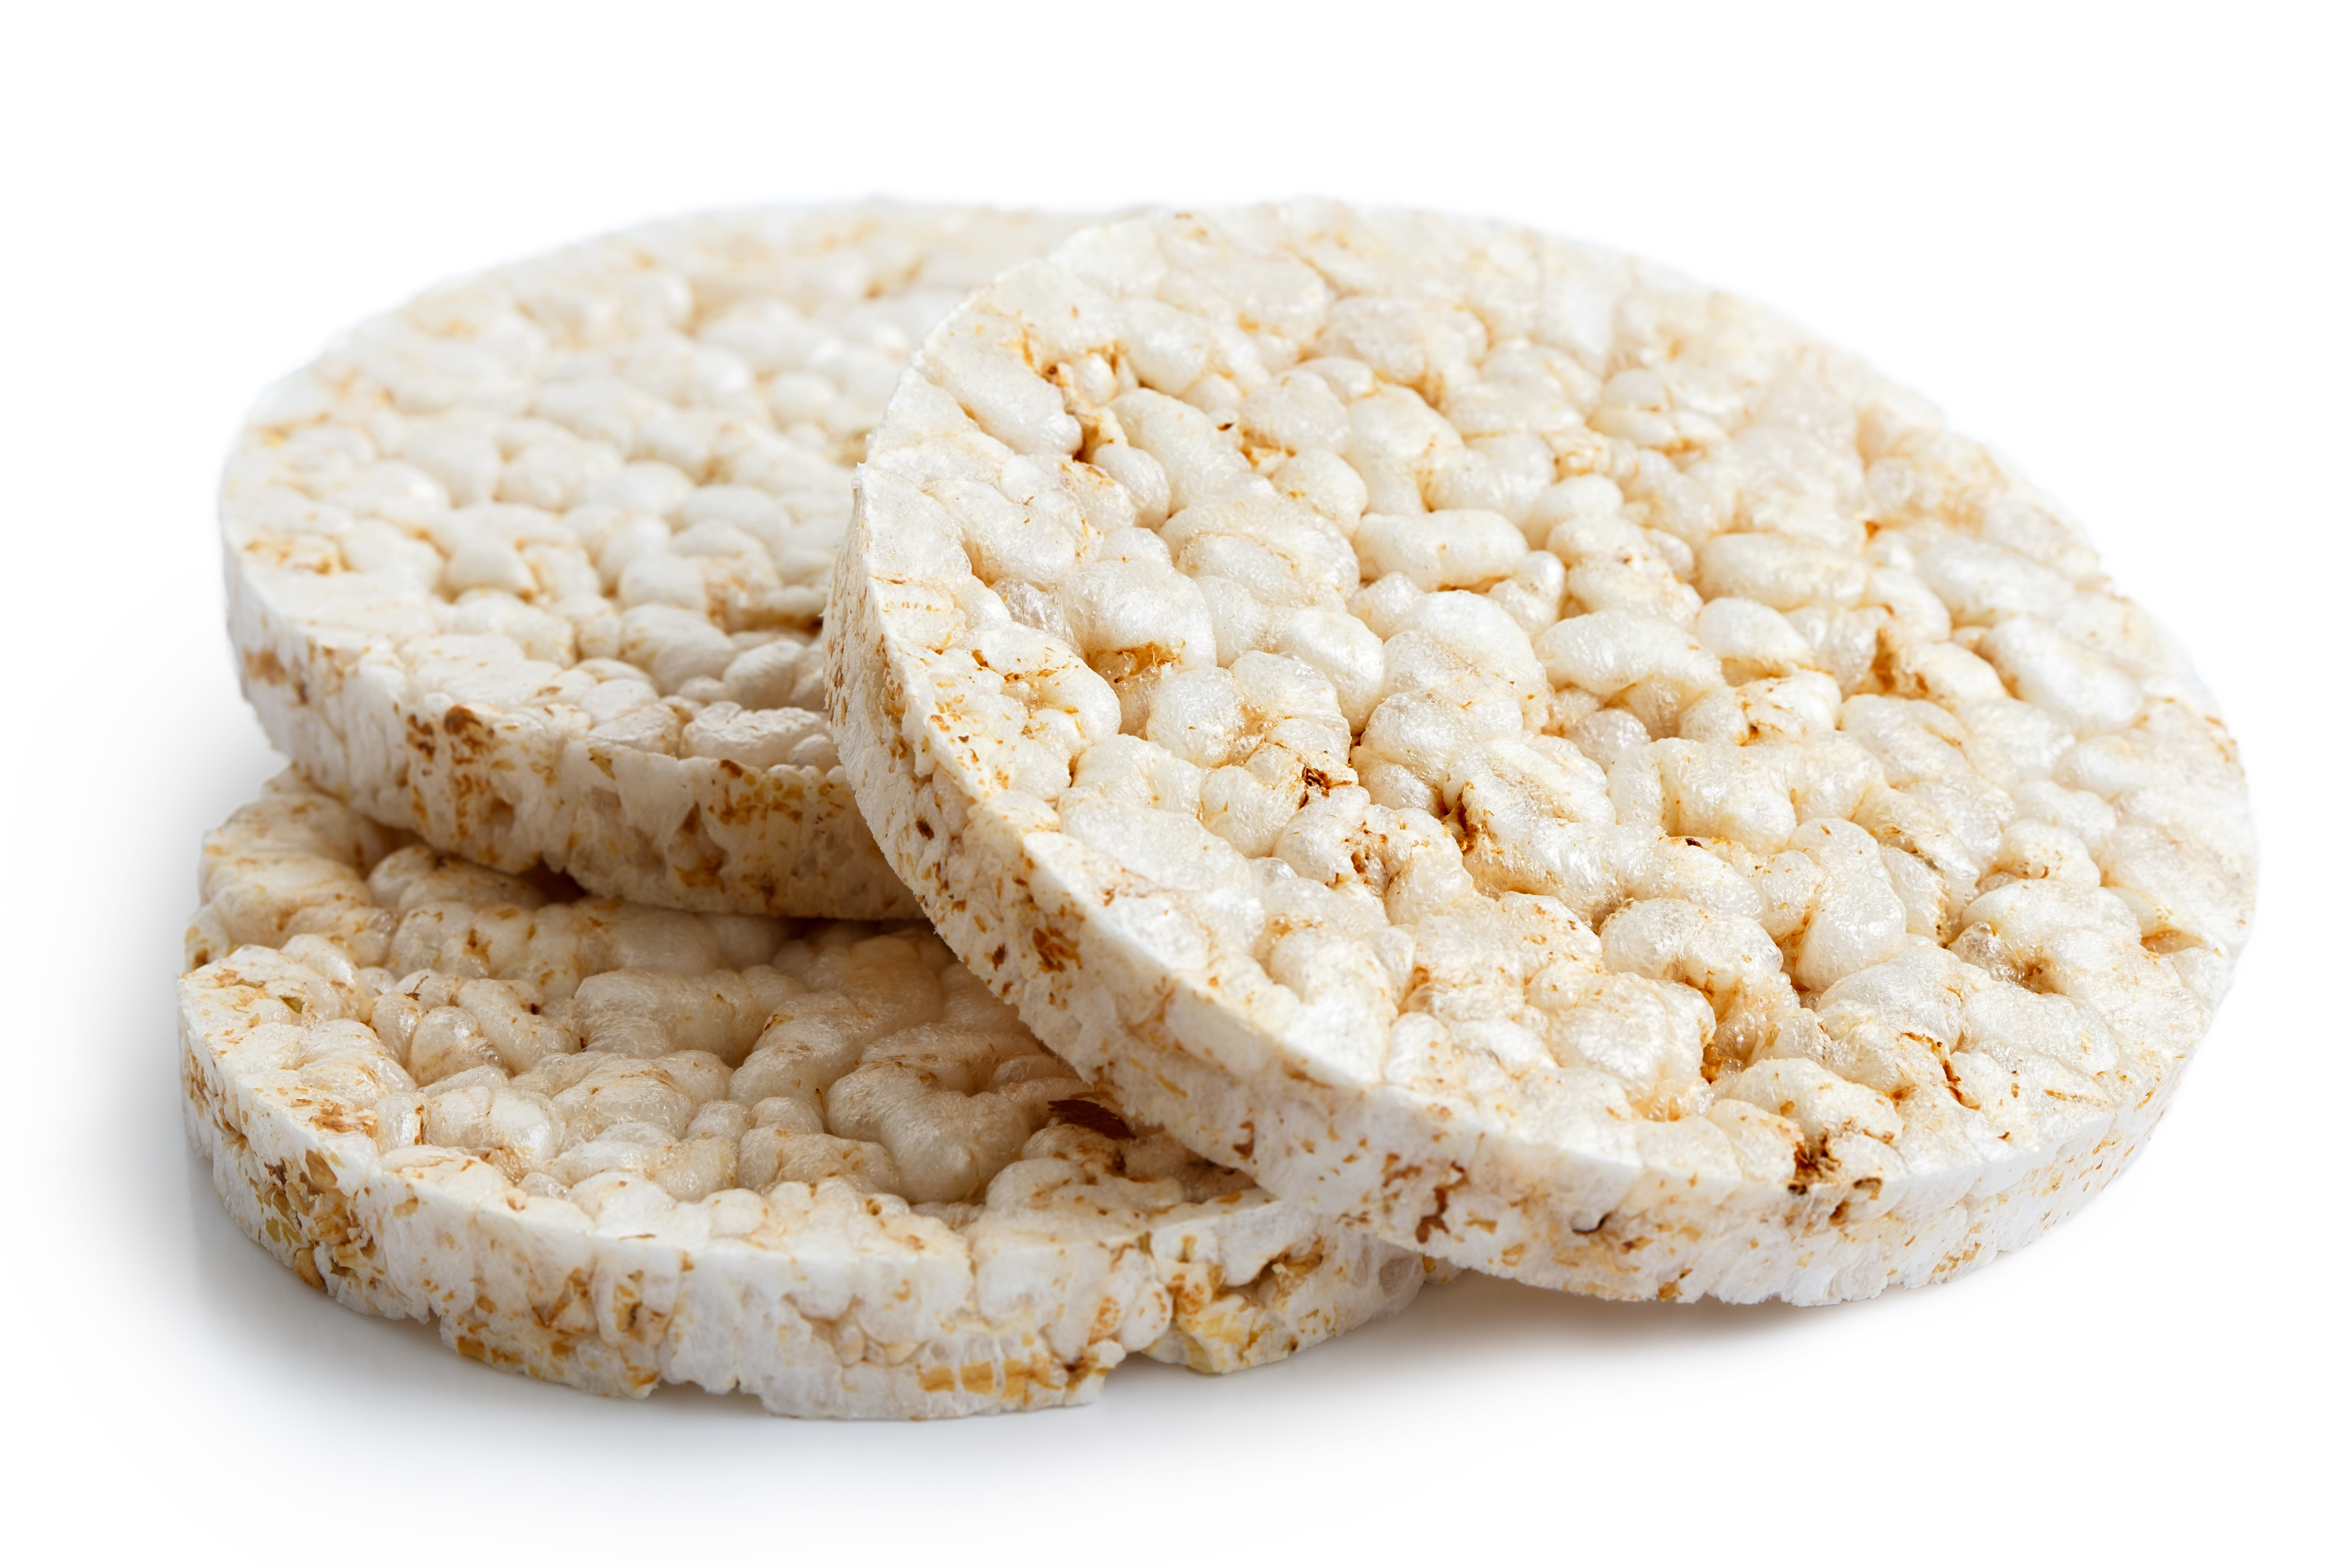 Rice cakes | Source: Shutterstock